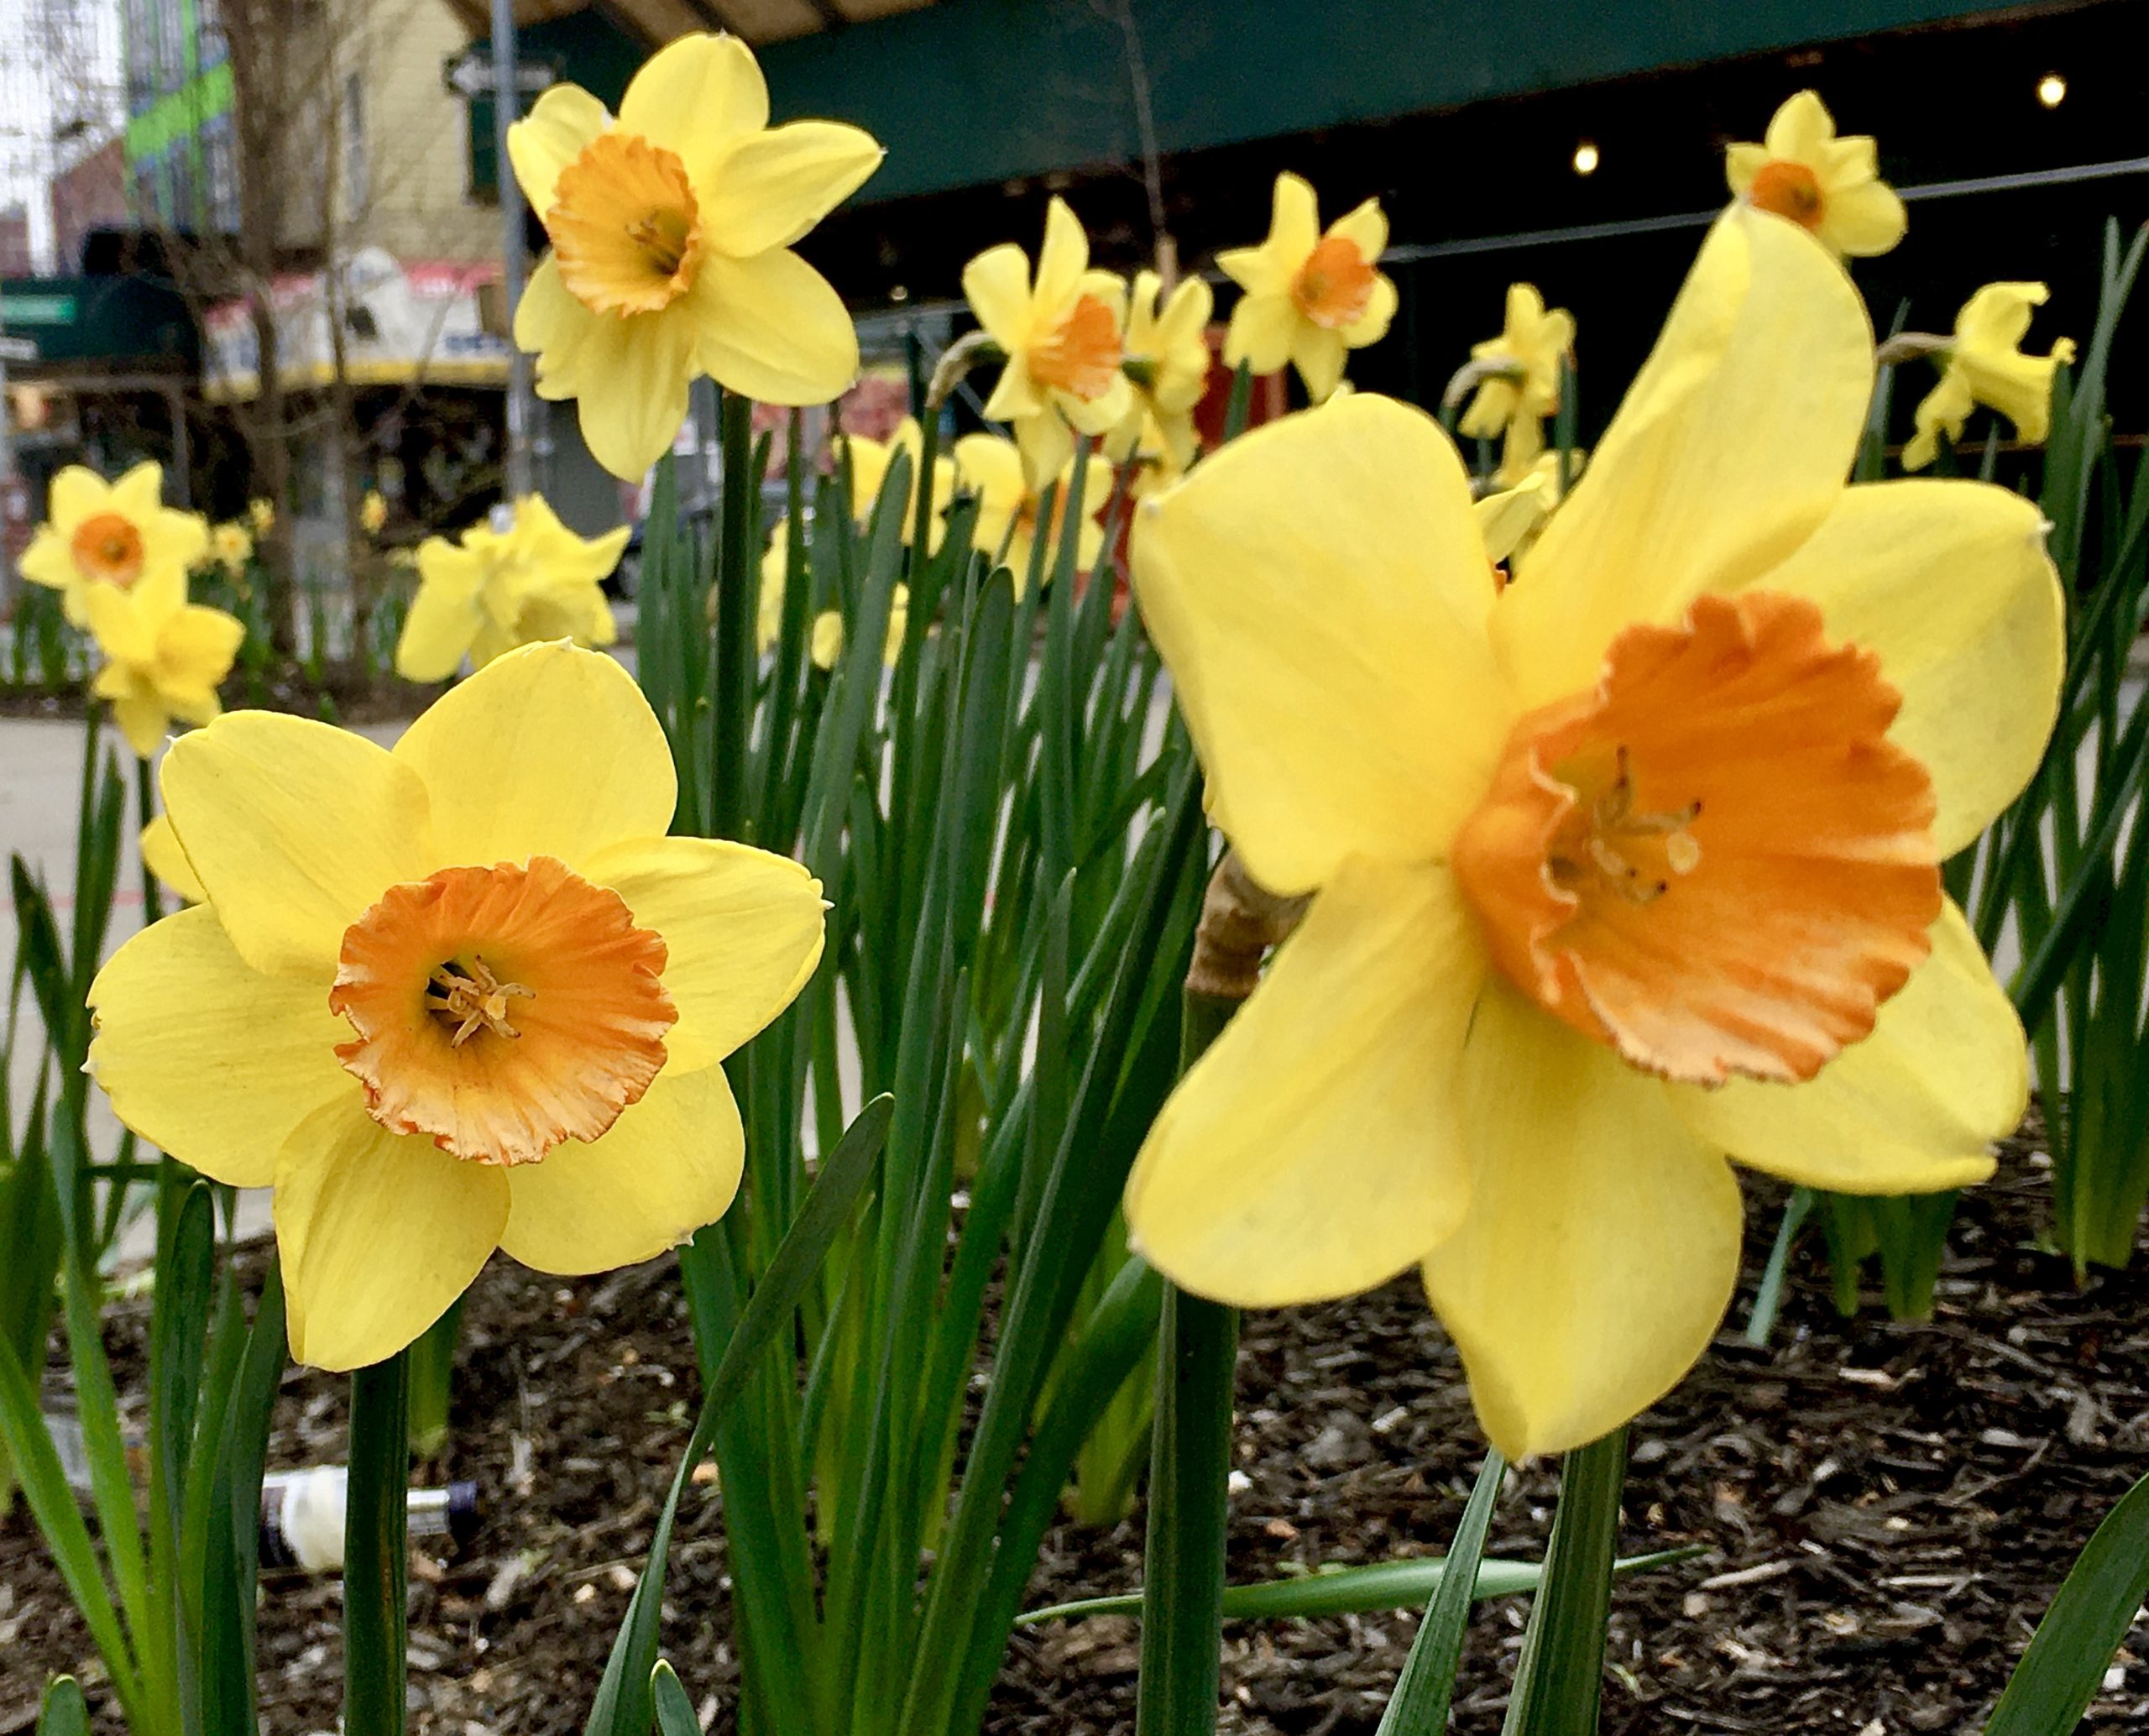 Daffodils are blooming in the median strip on Bushwick Avenue at the intersection of Seigel Street. Photo: Lore Croghan/Brooklyn Eagle